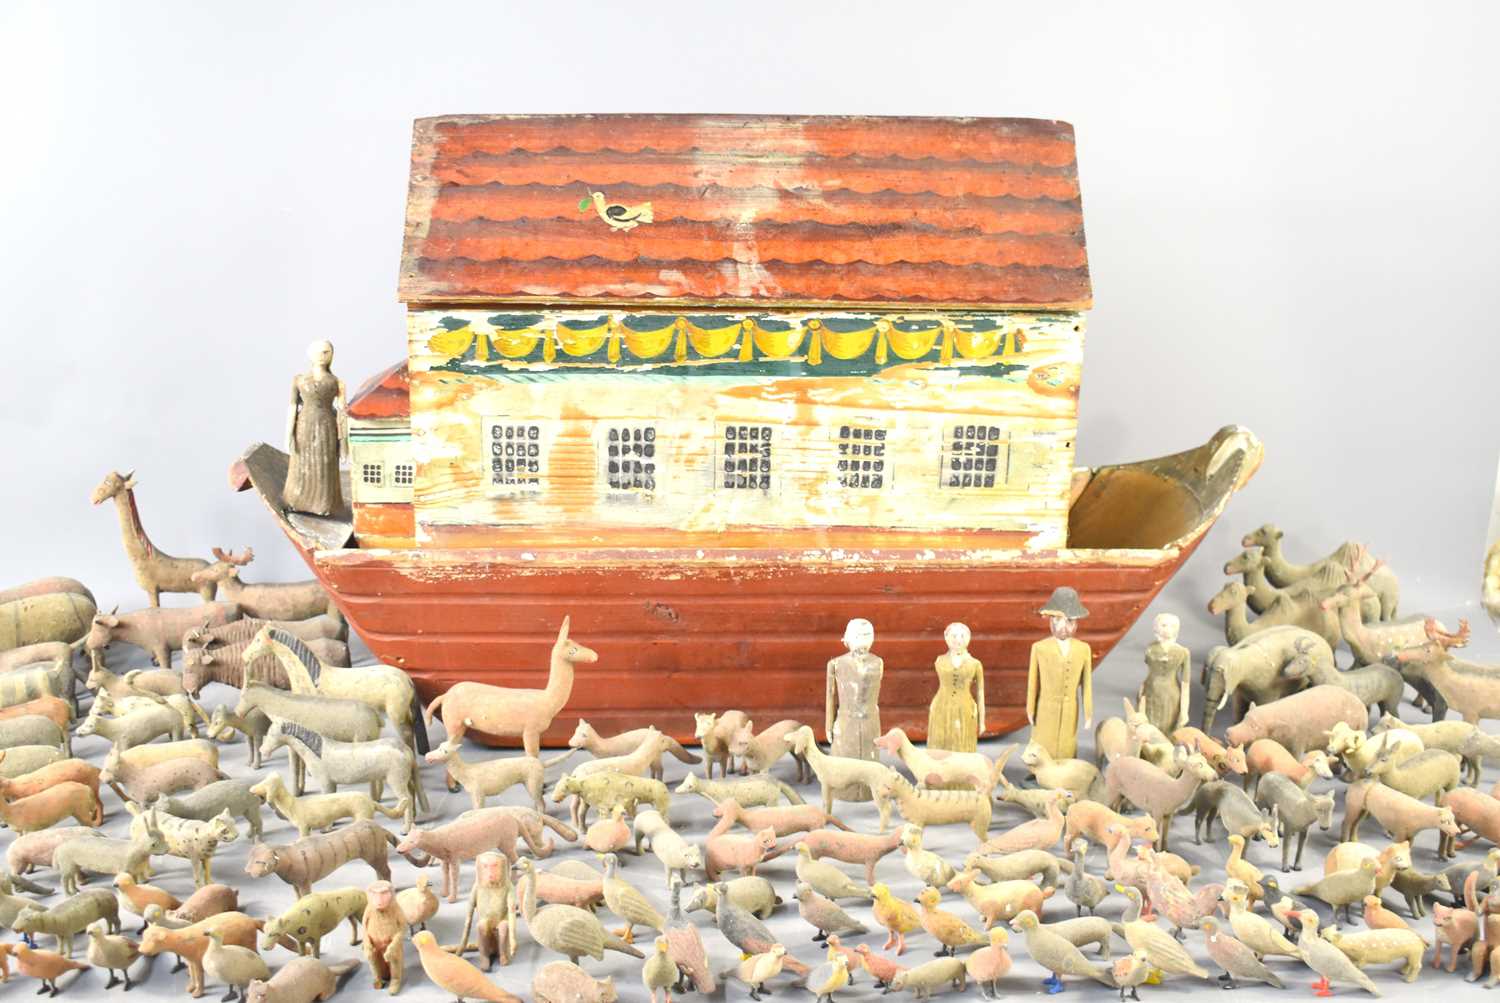 A large Erzgebirge German Noah's ark and animals, mid 19th century, the pine arc painted with